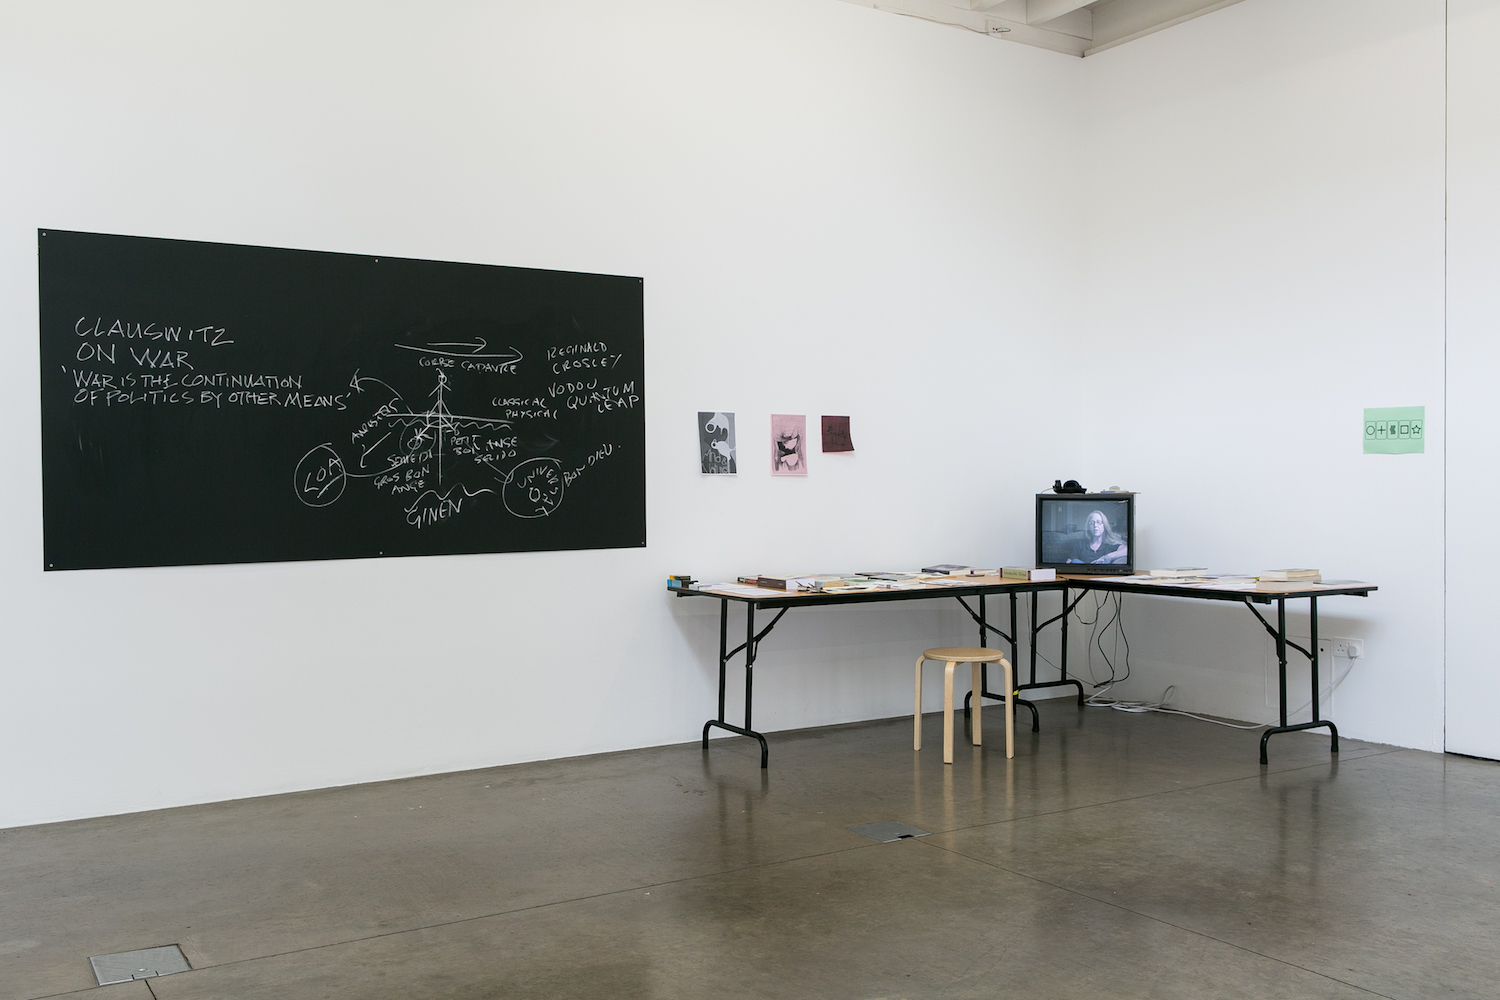 Bonnie Camplin , installation view, The Military Industrial Complex, South London Gallery, London, 13 - 15 June 2015. All images courtesy the artist and Cabinet, London